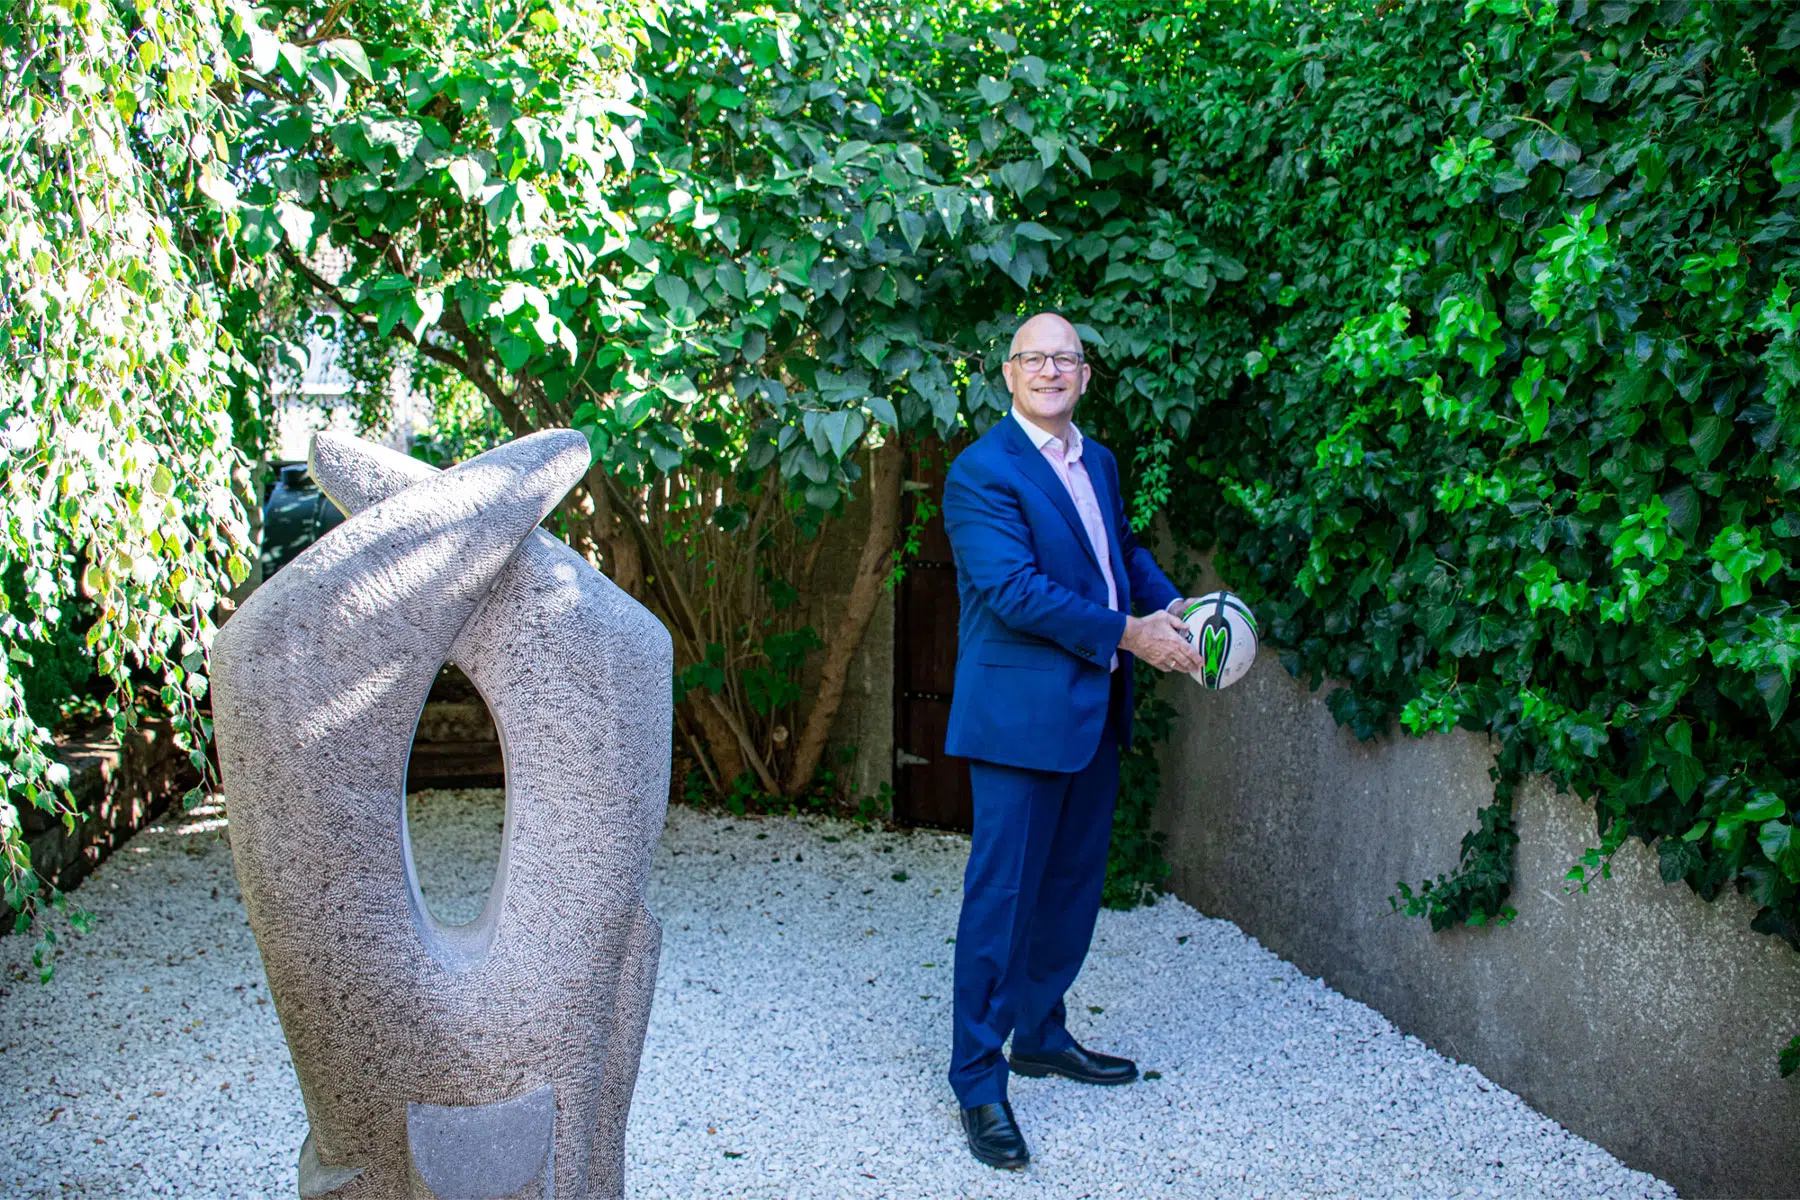 John Griffin holding a rugby ball in the office garden.